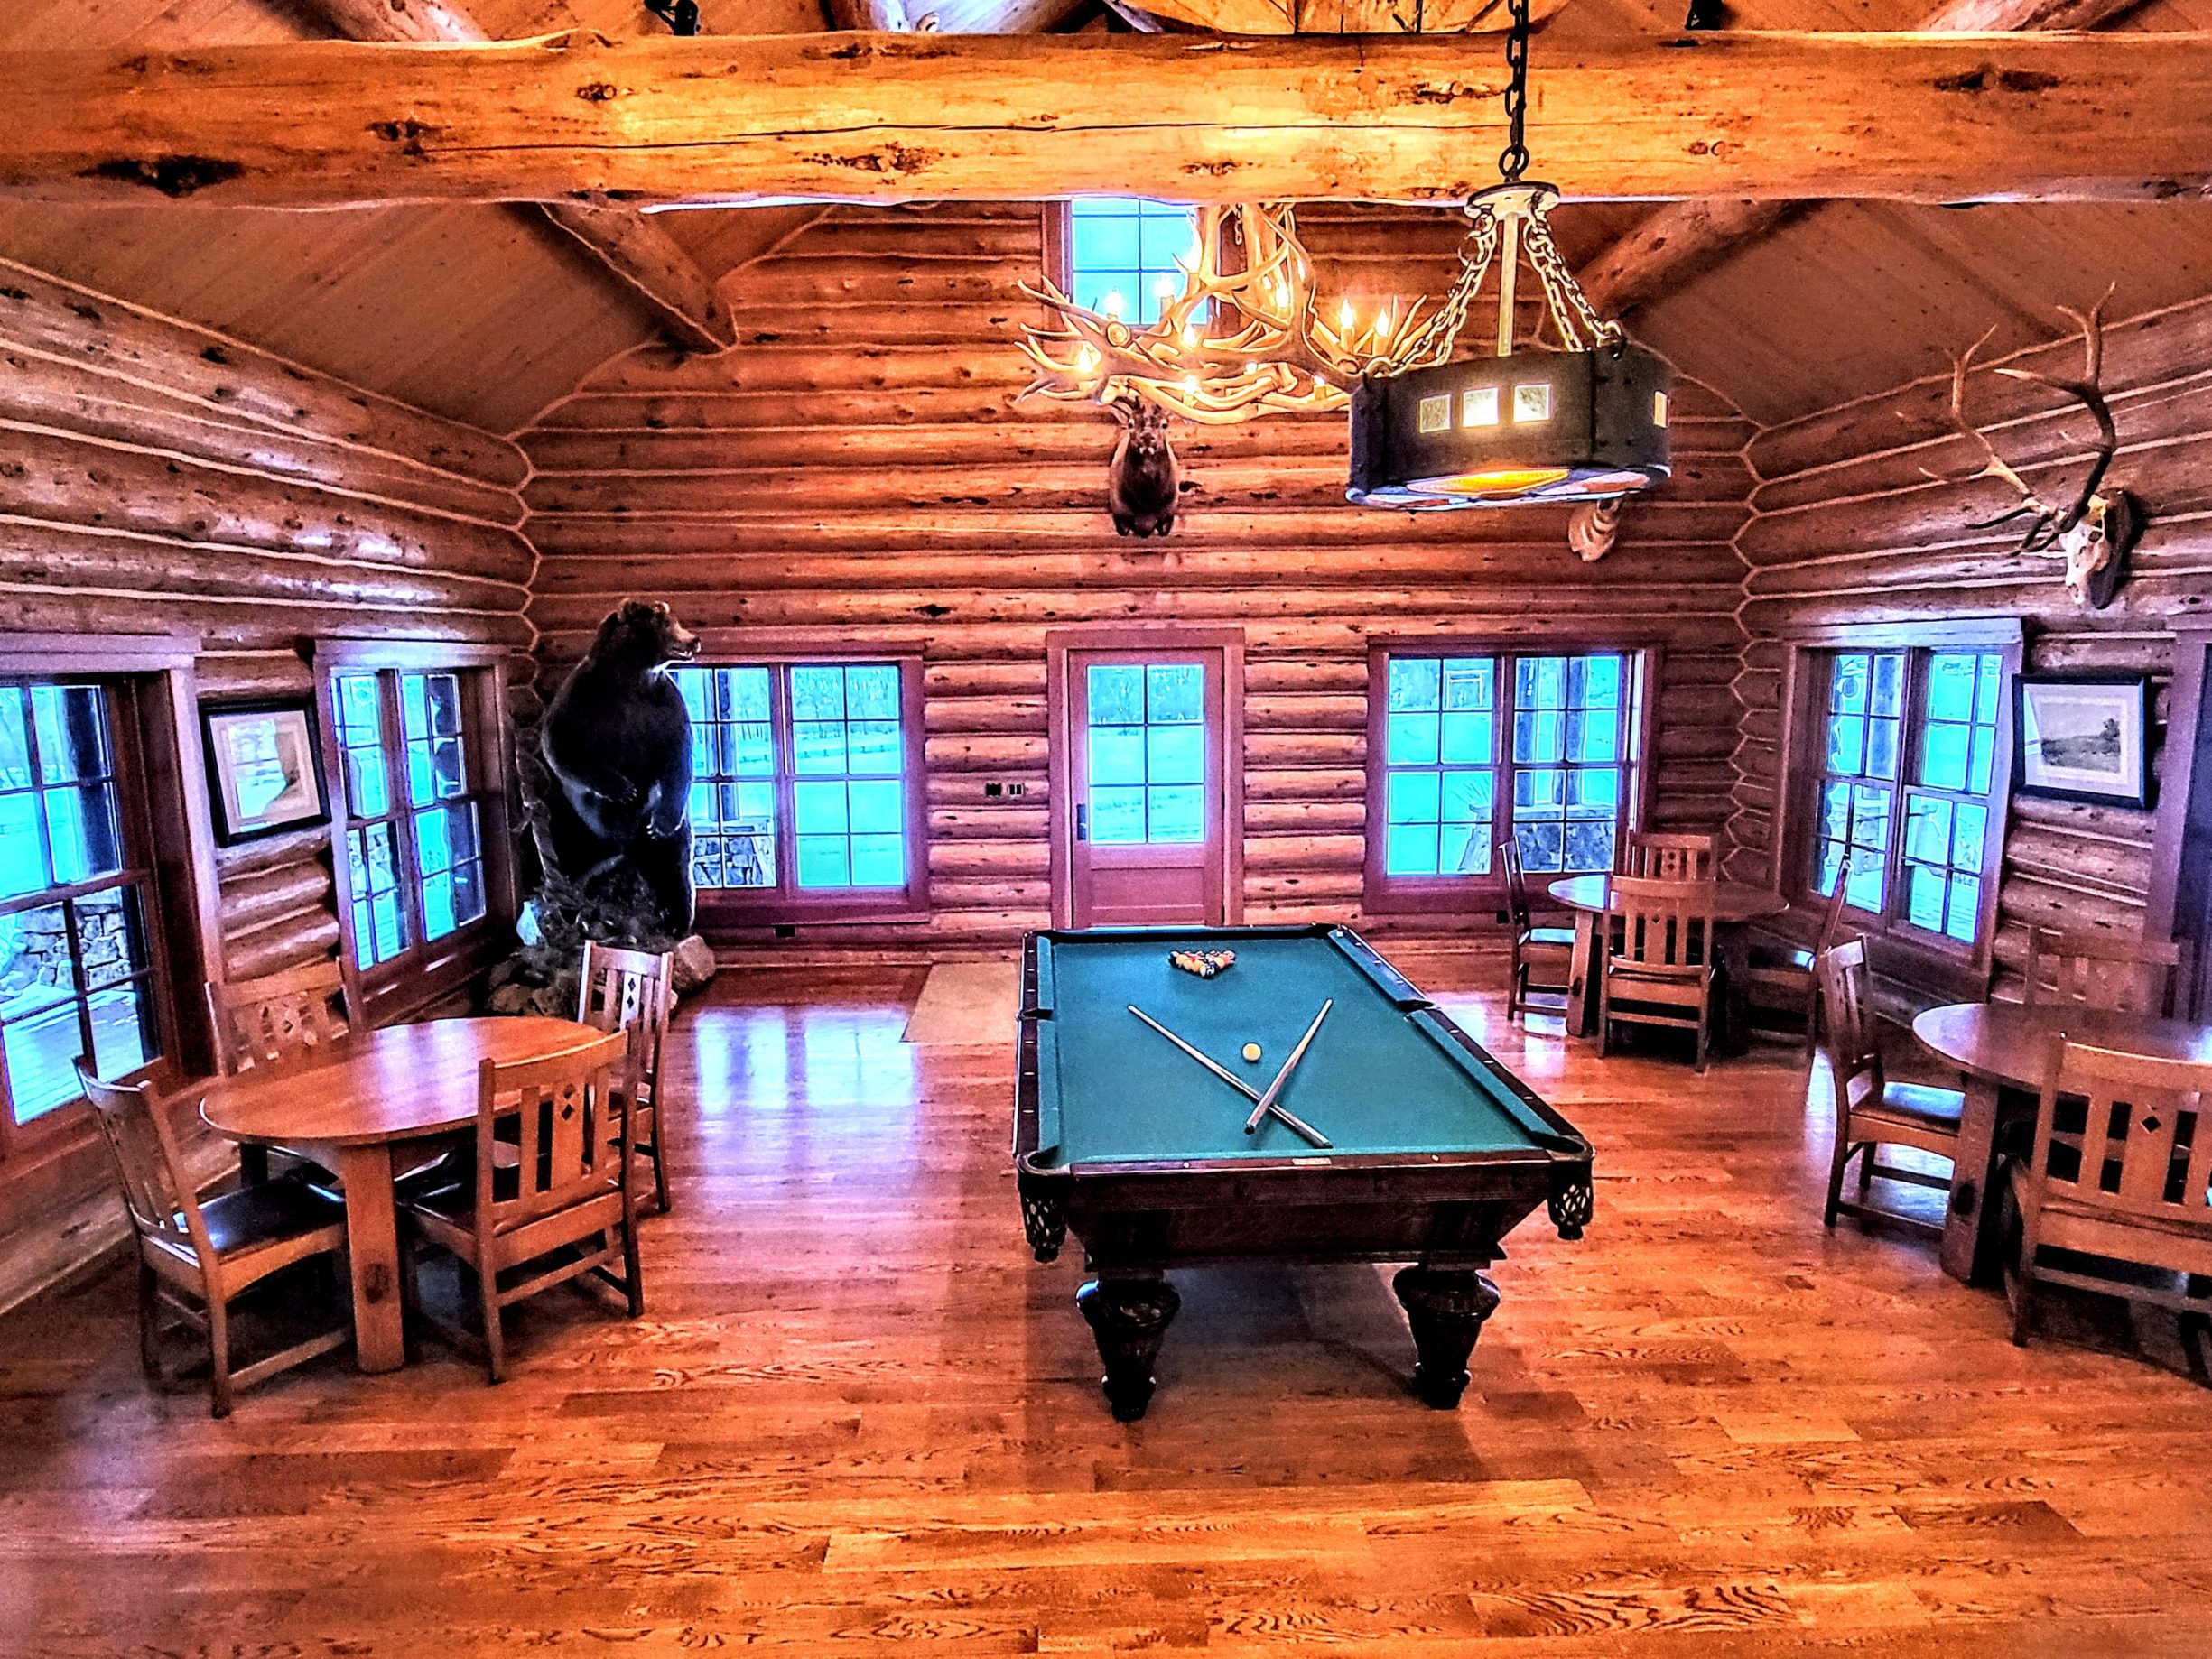 The Lodge Game Room